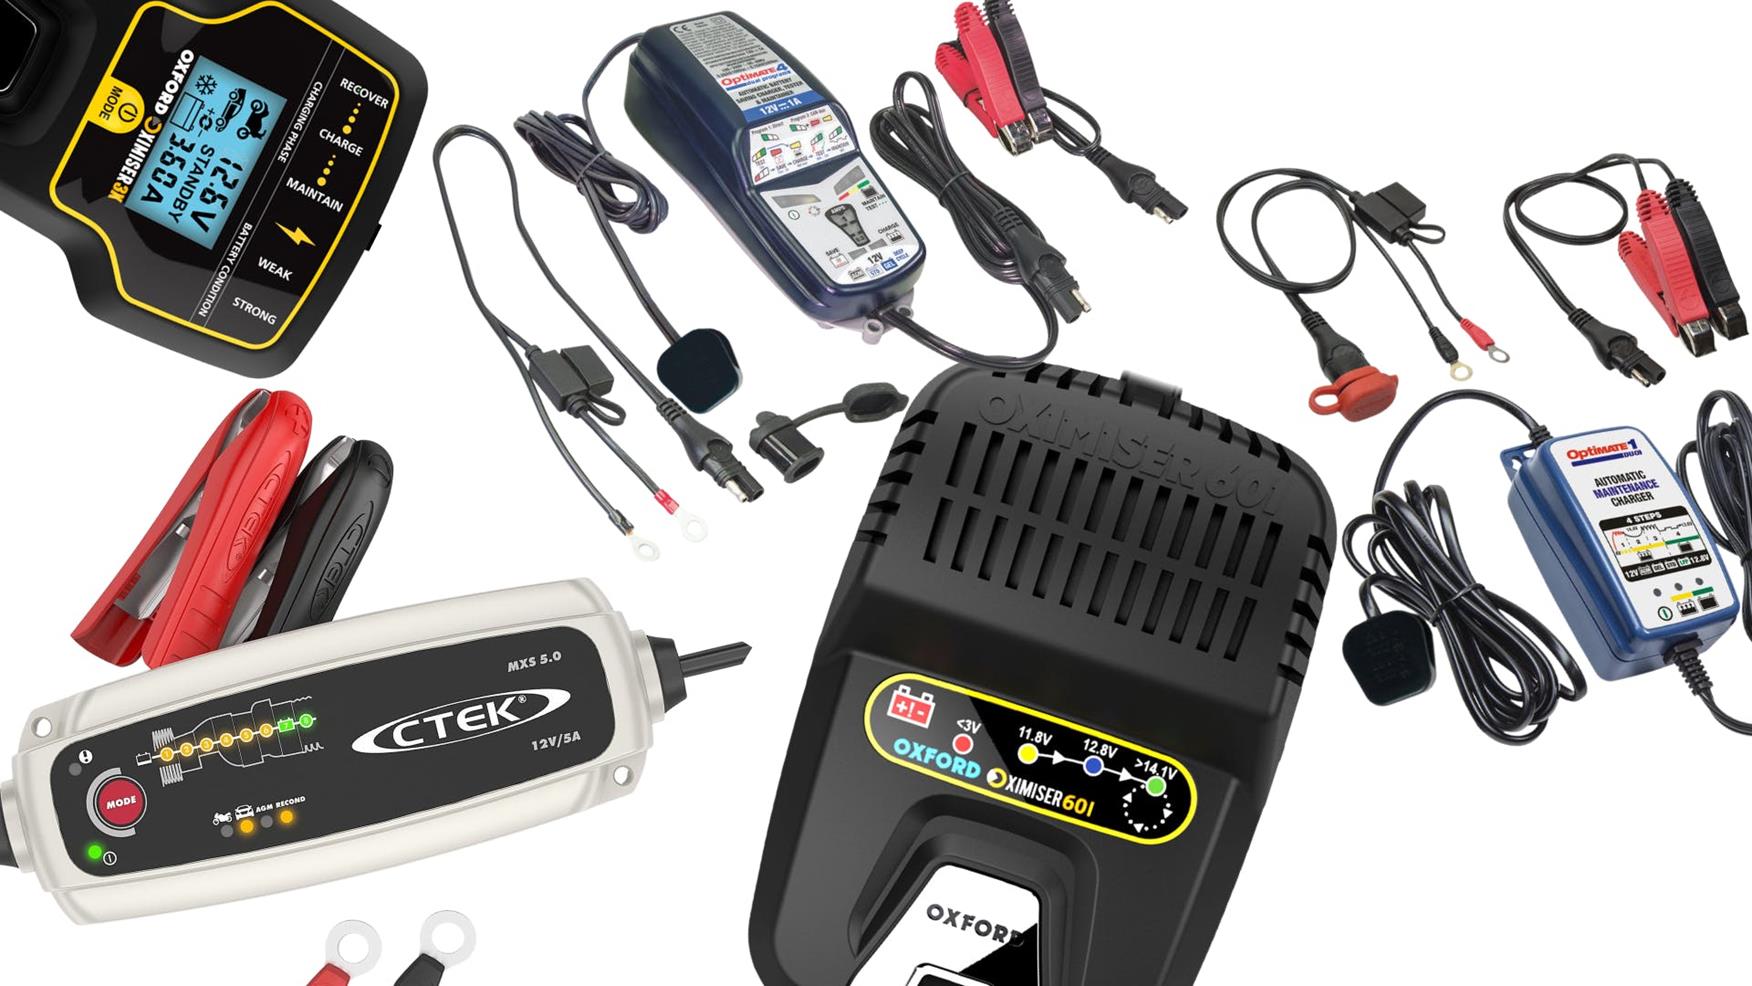 mains car battery charger charging flat car battery in cold